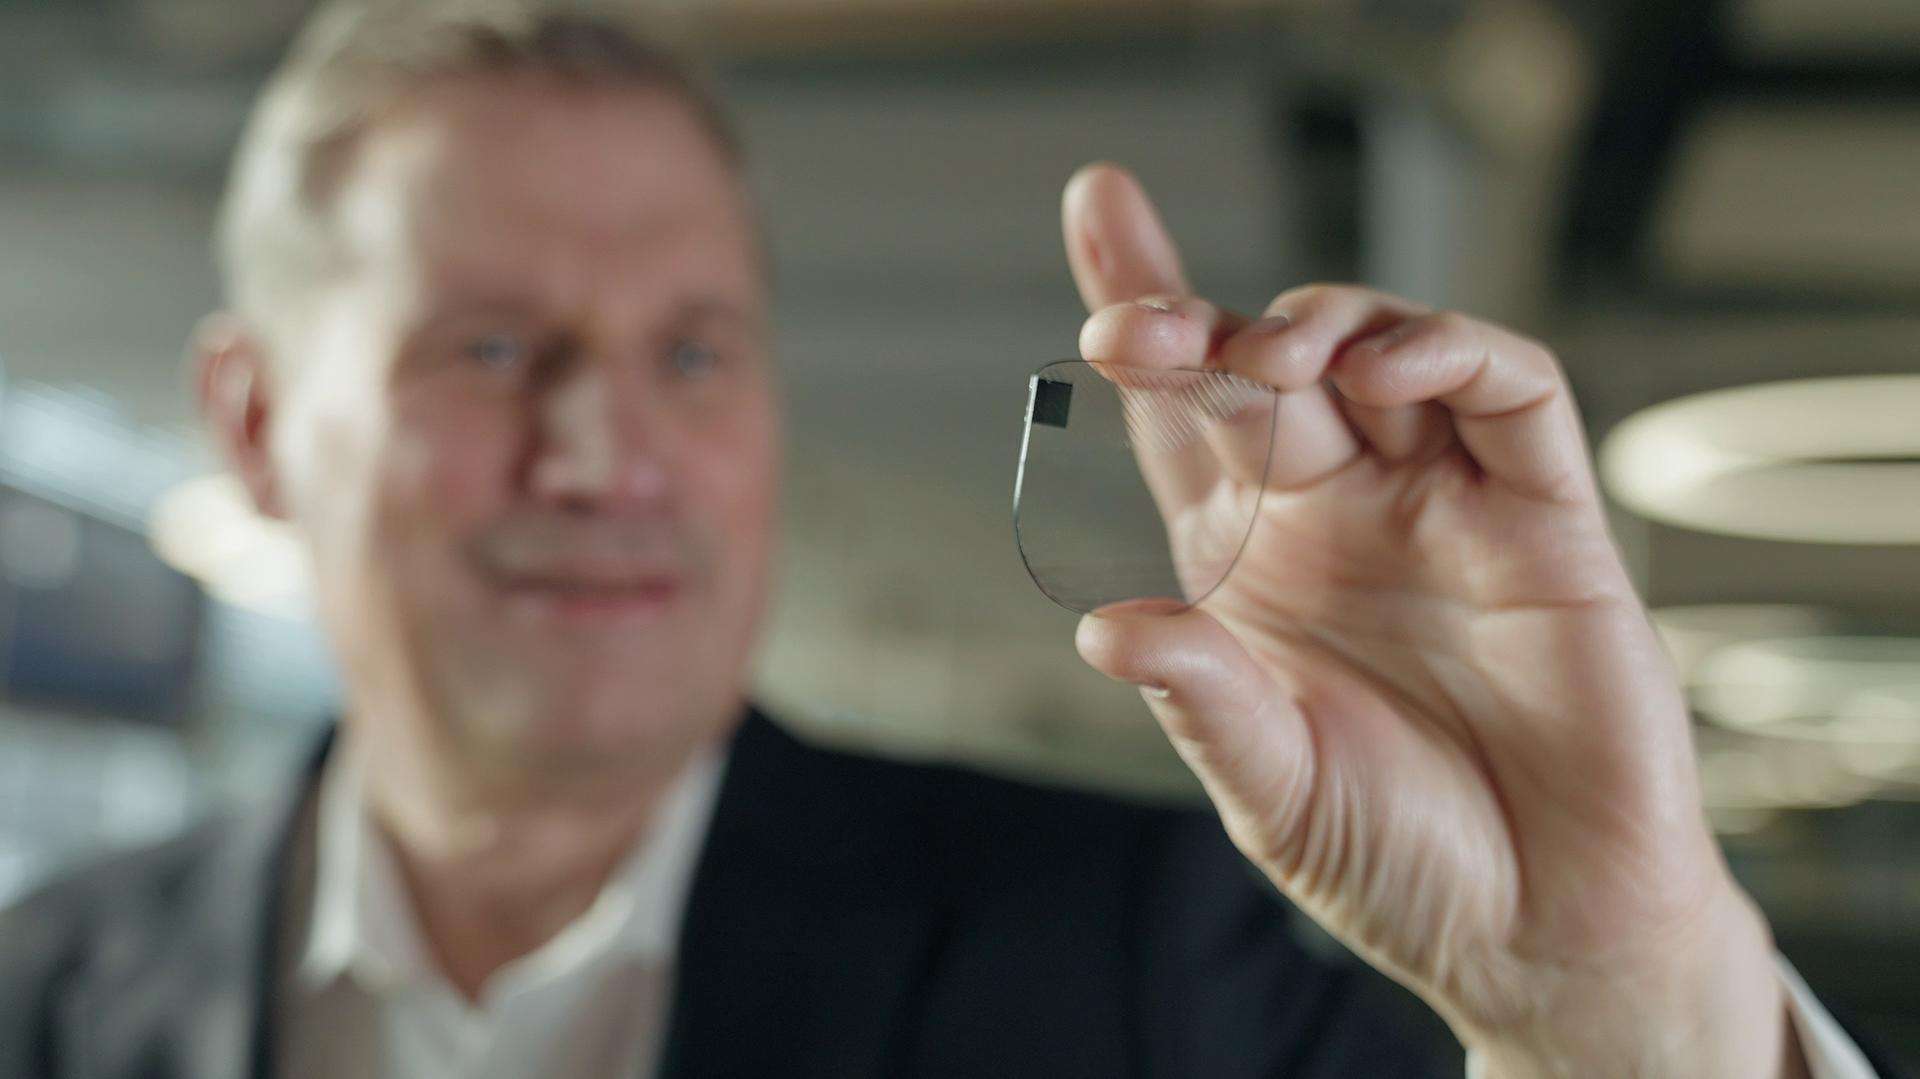 CEO Dr. Heinricht holding a waveguide for Augmented Reality